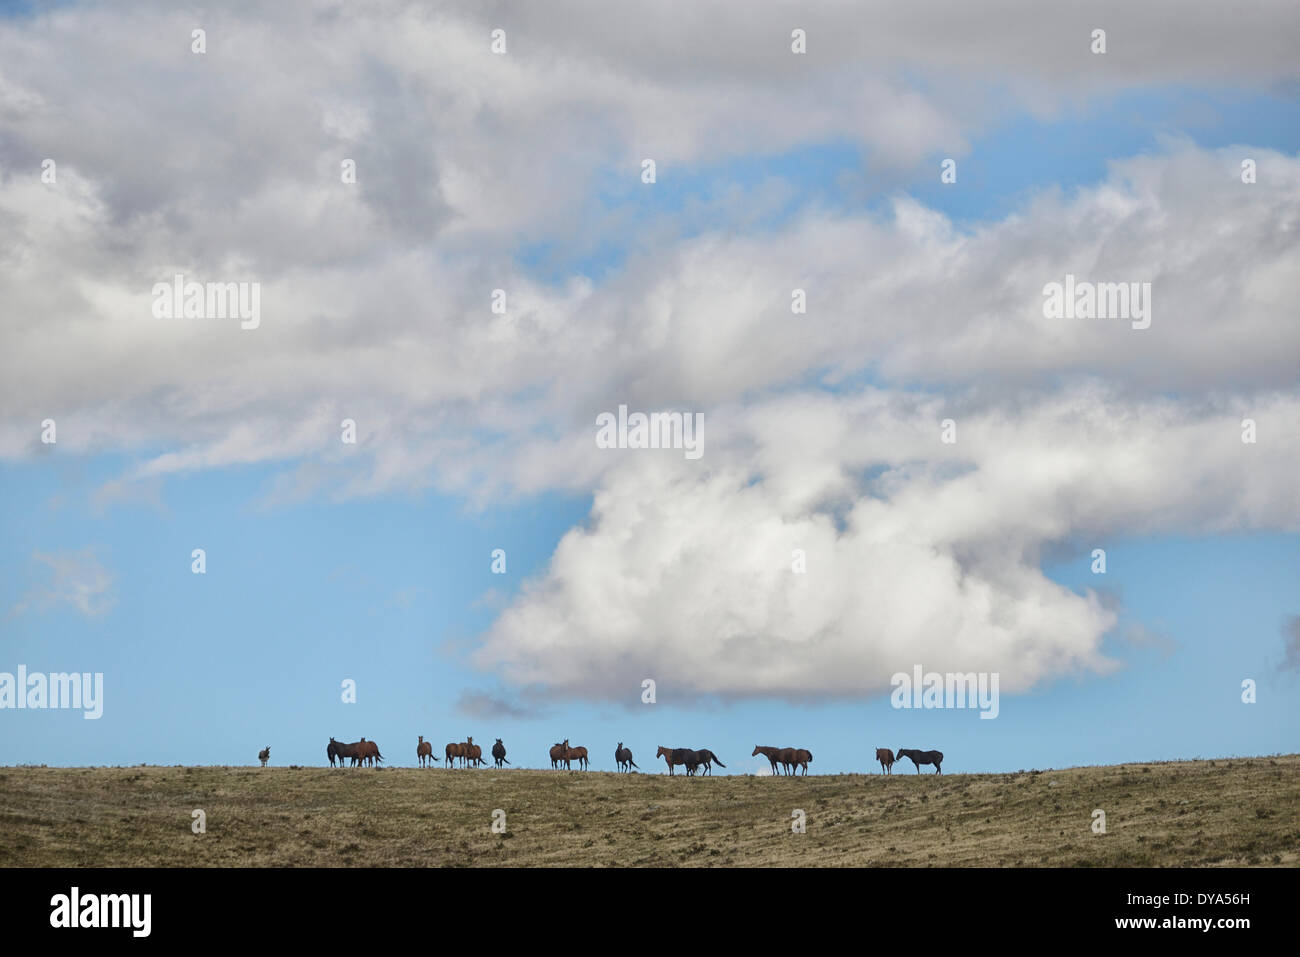 North America, Canada, Alberta, Blood, Indian, horses, reservation, clouds, plains, grassland Stock Photo